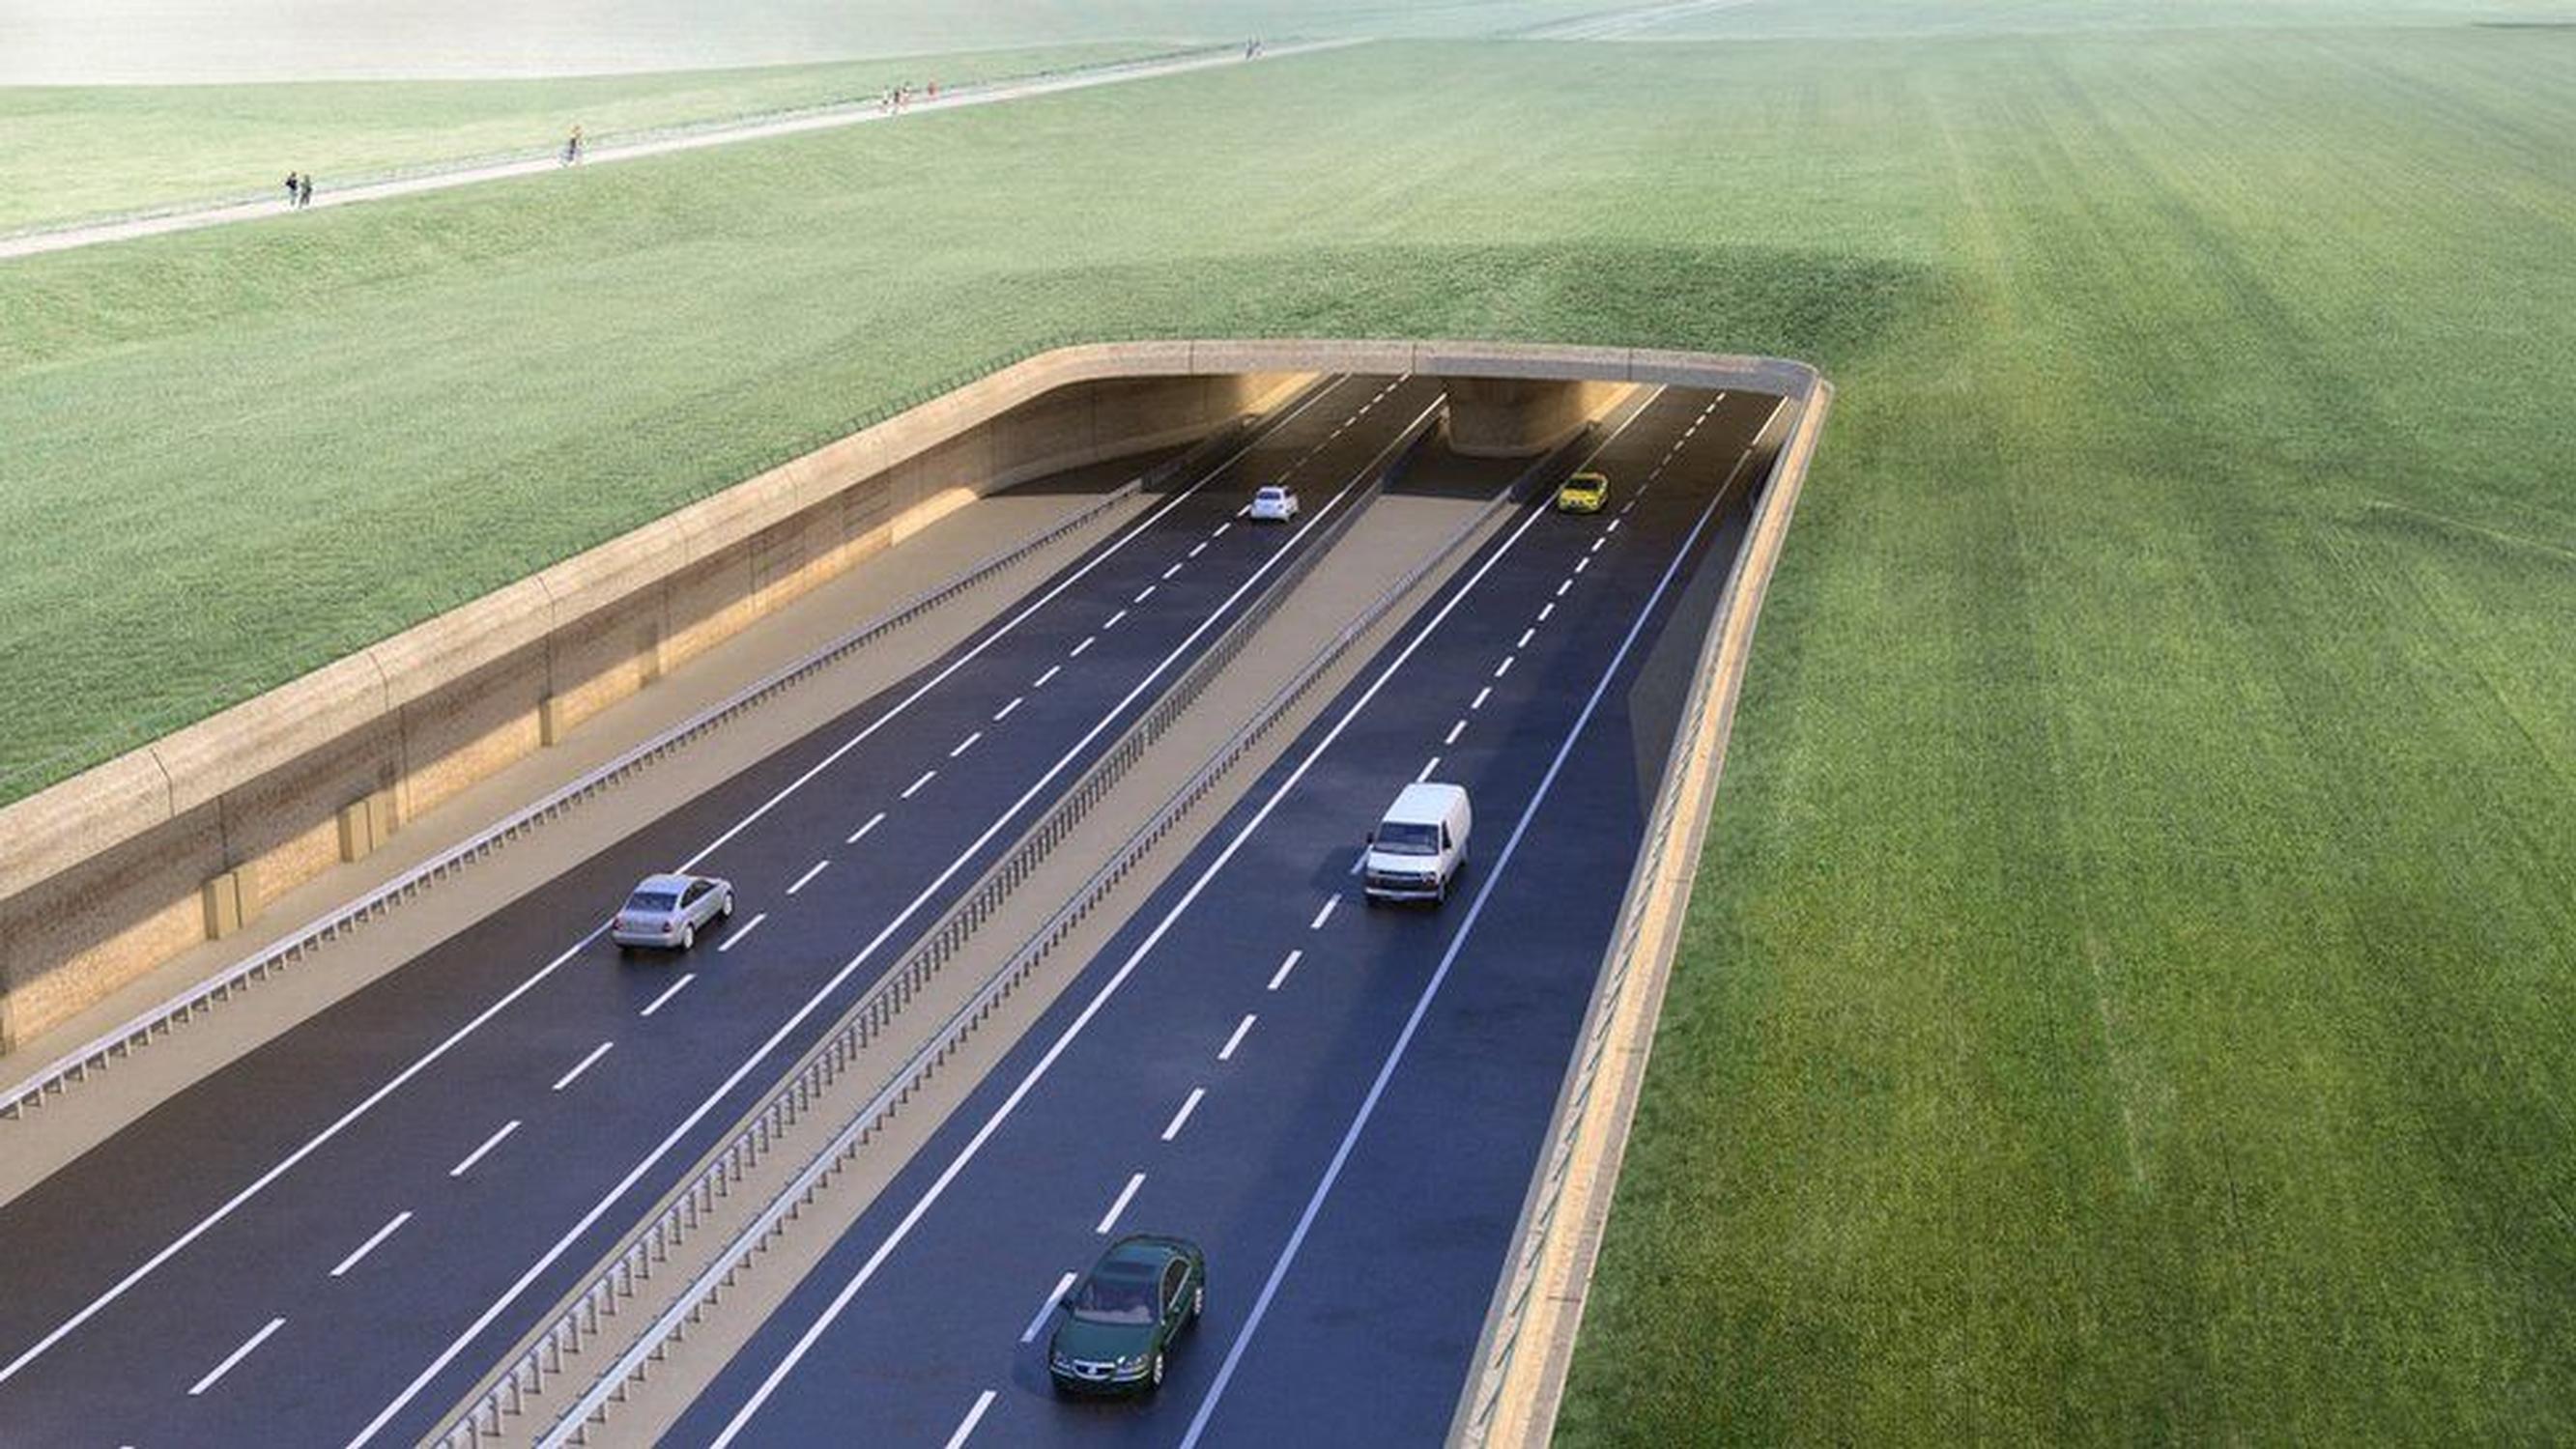 The £1.7bn proposal for Stonehenge includes a 13km two-lane dual carriageway on the A303, 3.3km of which will be tunnelled over